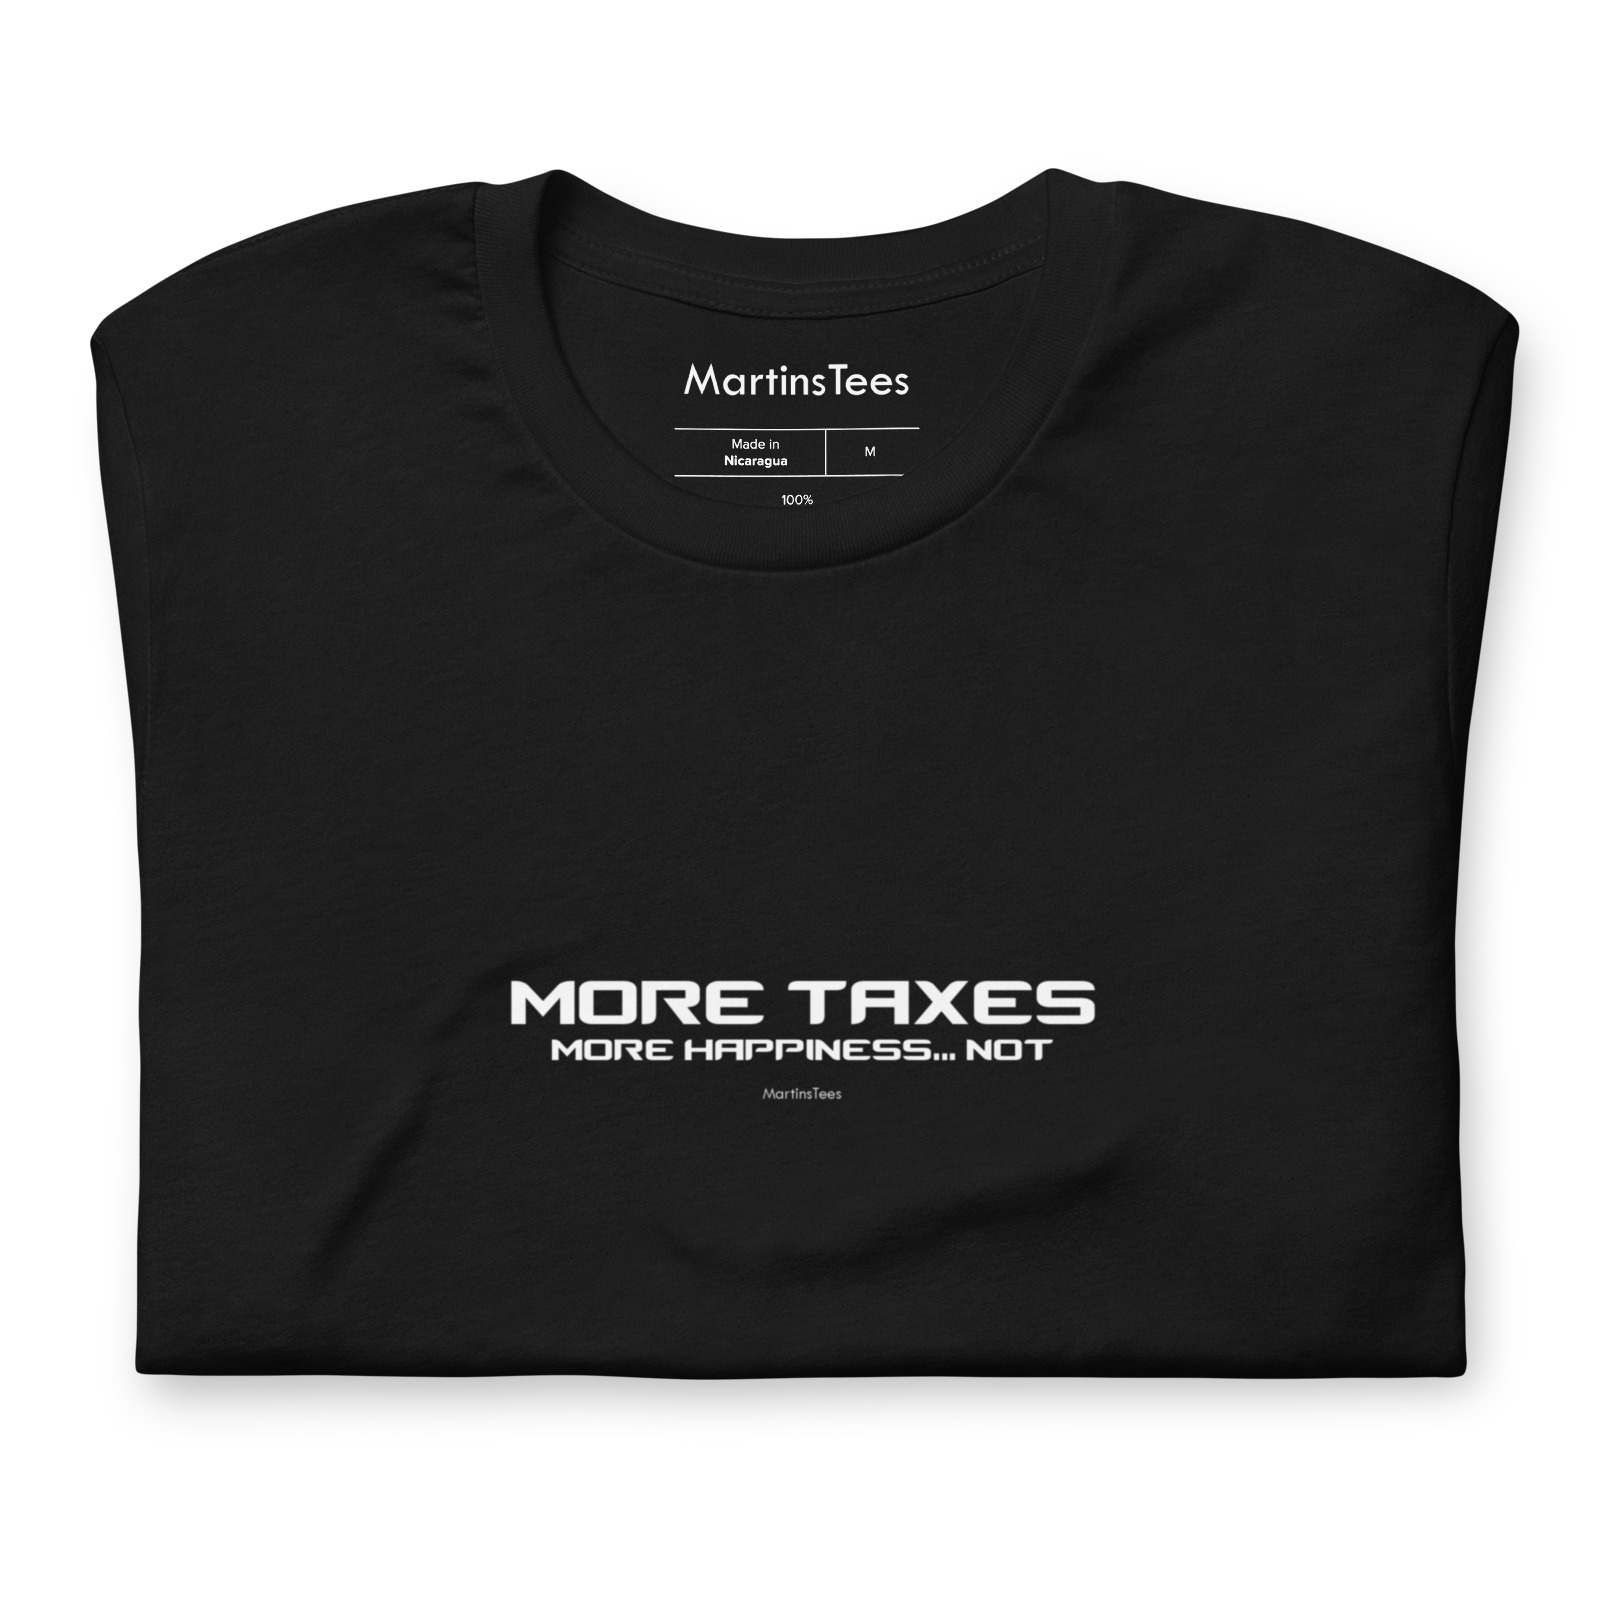 T-shirt: MORE TAXES - MORE HAPPINESS... NOT